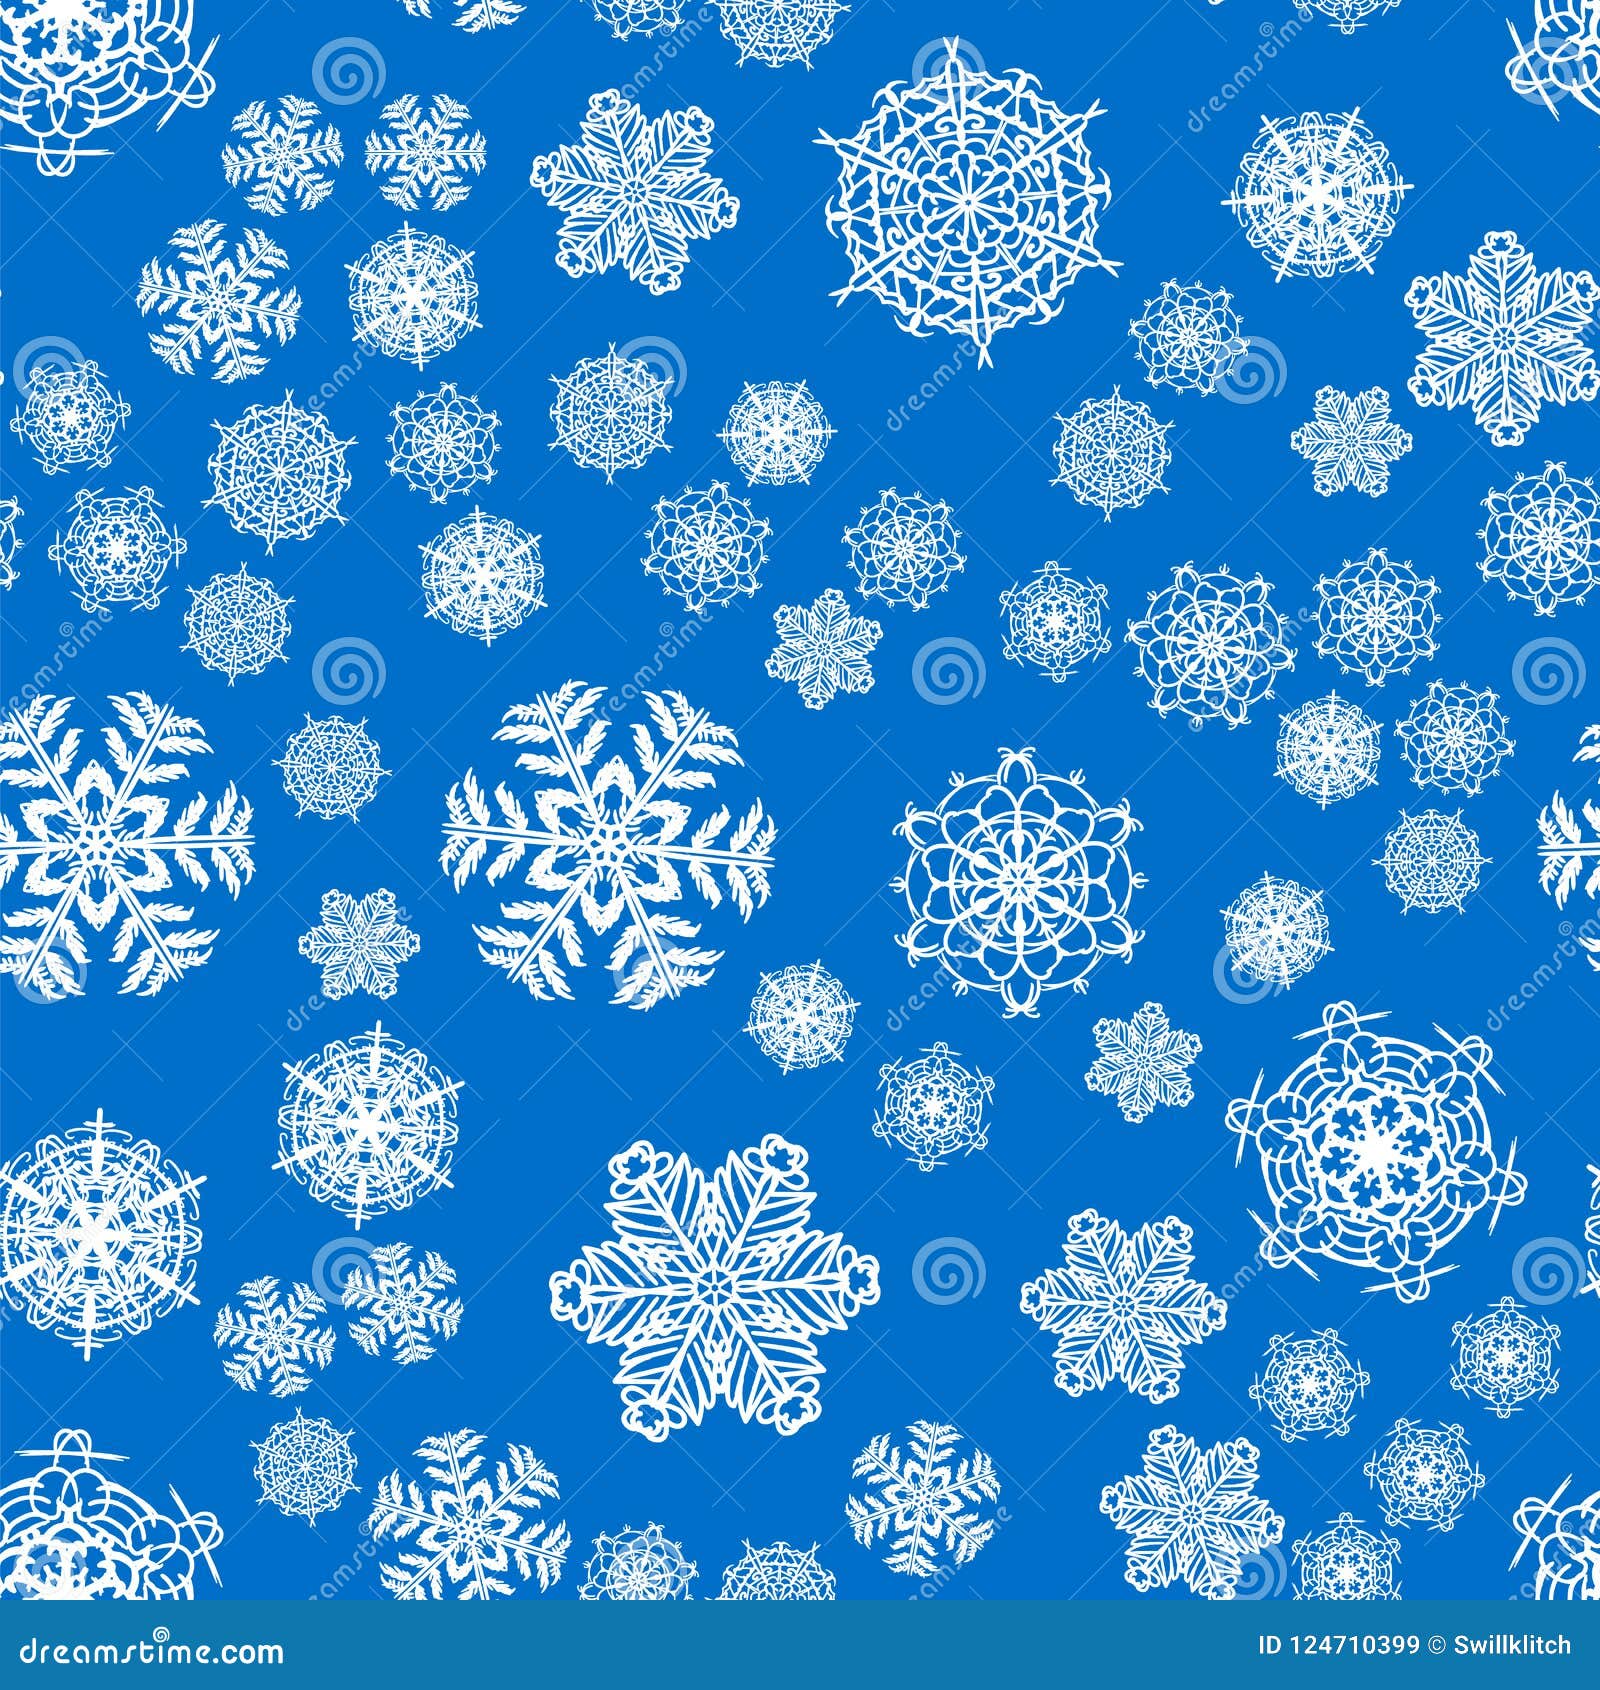 Christmas Snow Seamless Pattern with Beautiful Snowflakes Stock Vector ...